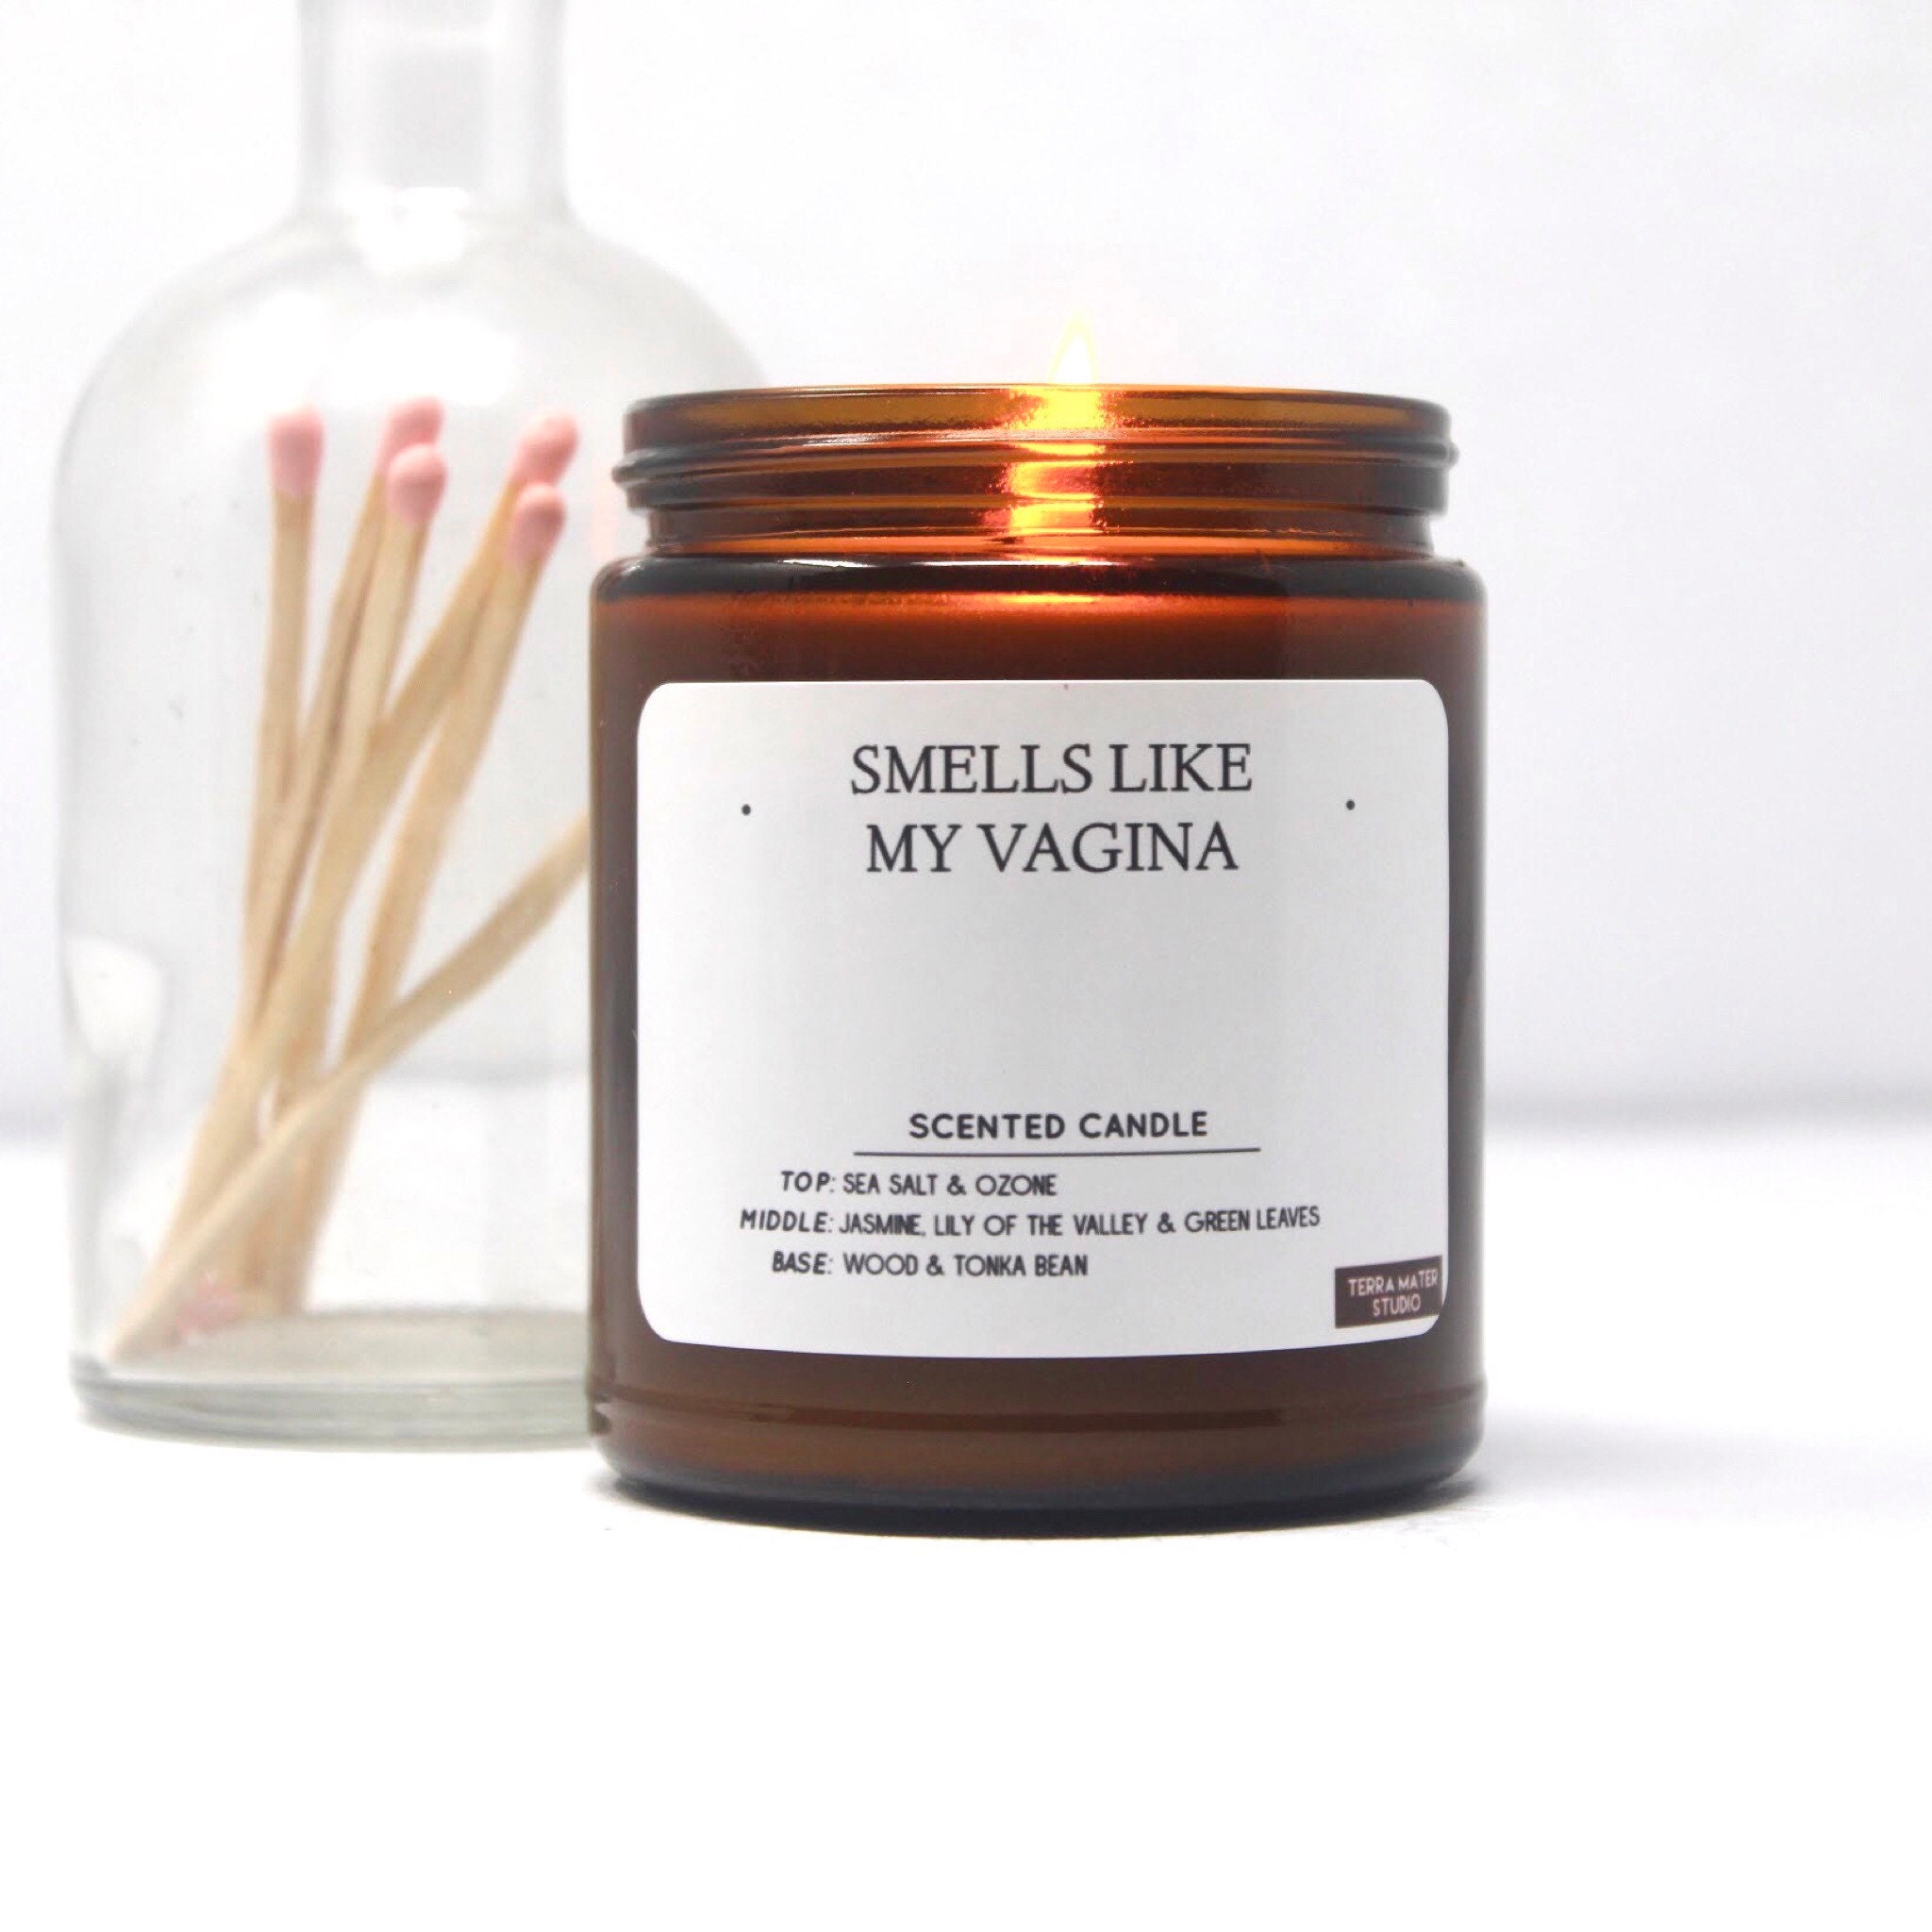 Smells Like My Vagina Scented Candle Soy Candle Vegan | Etsy